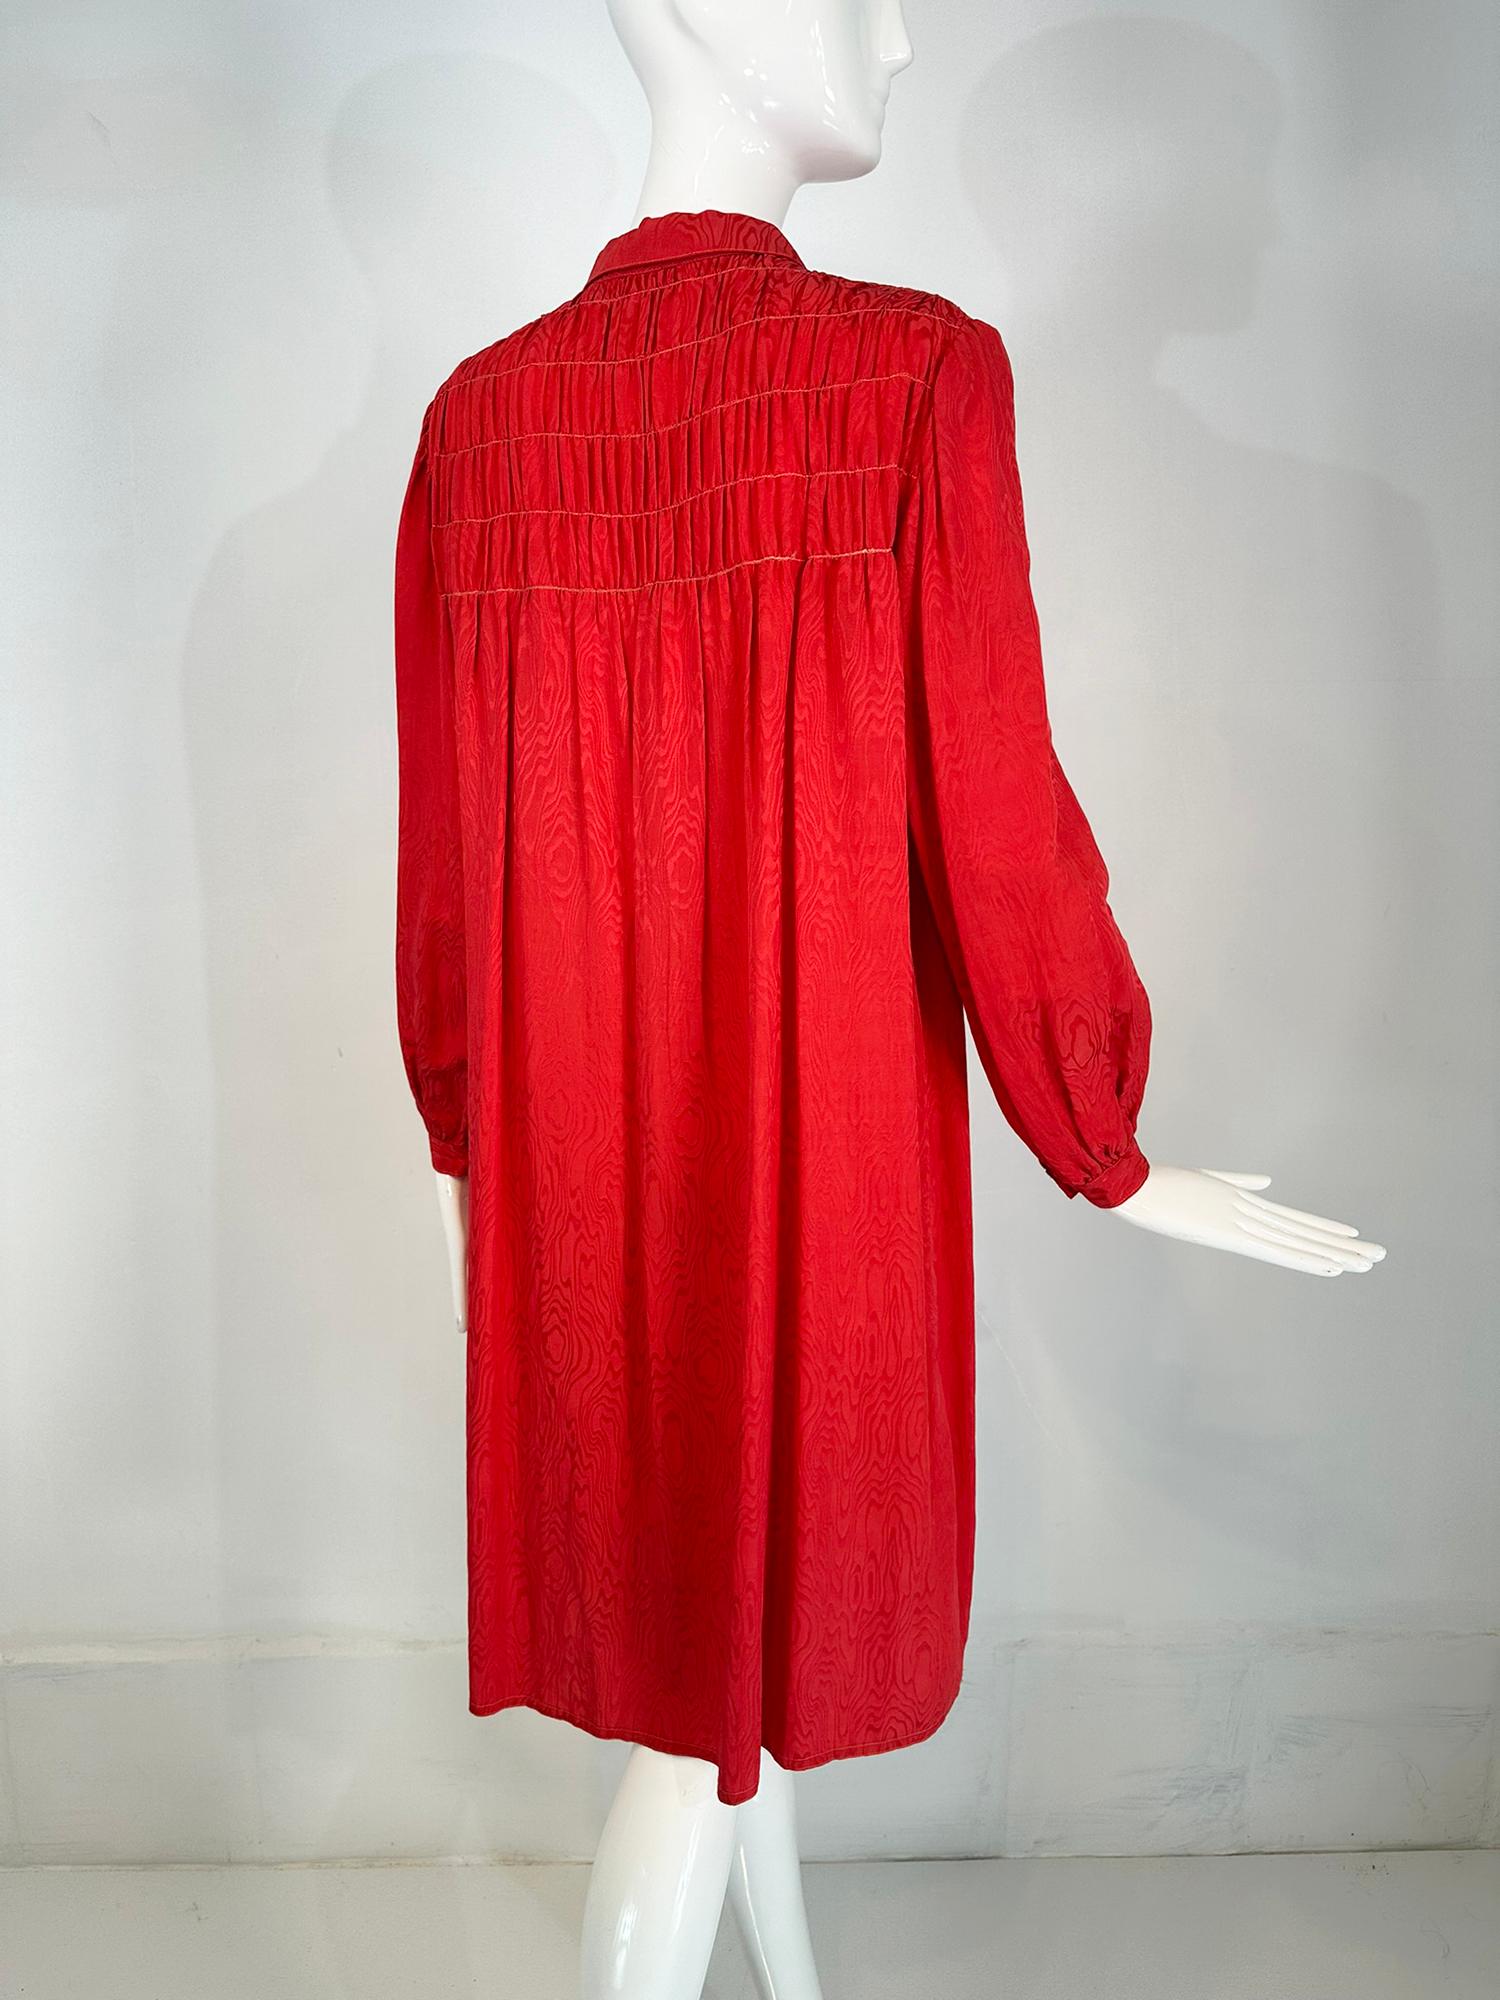 Geoffrey Beene Coral Red Silk Jacquard Smock Dress 1970s For Sale 4